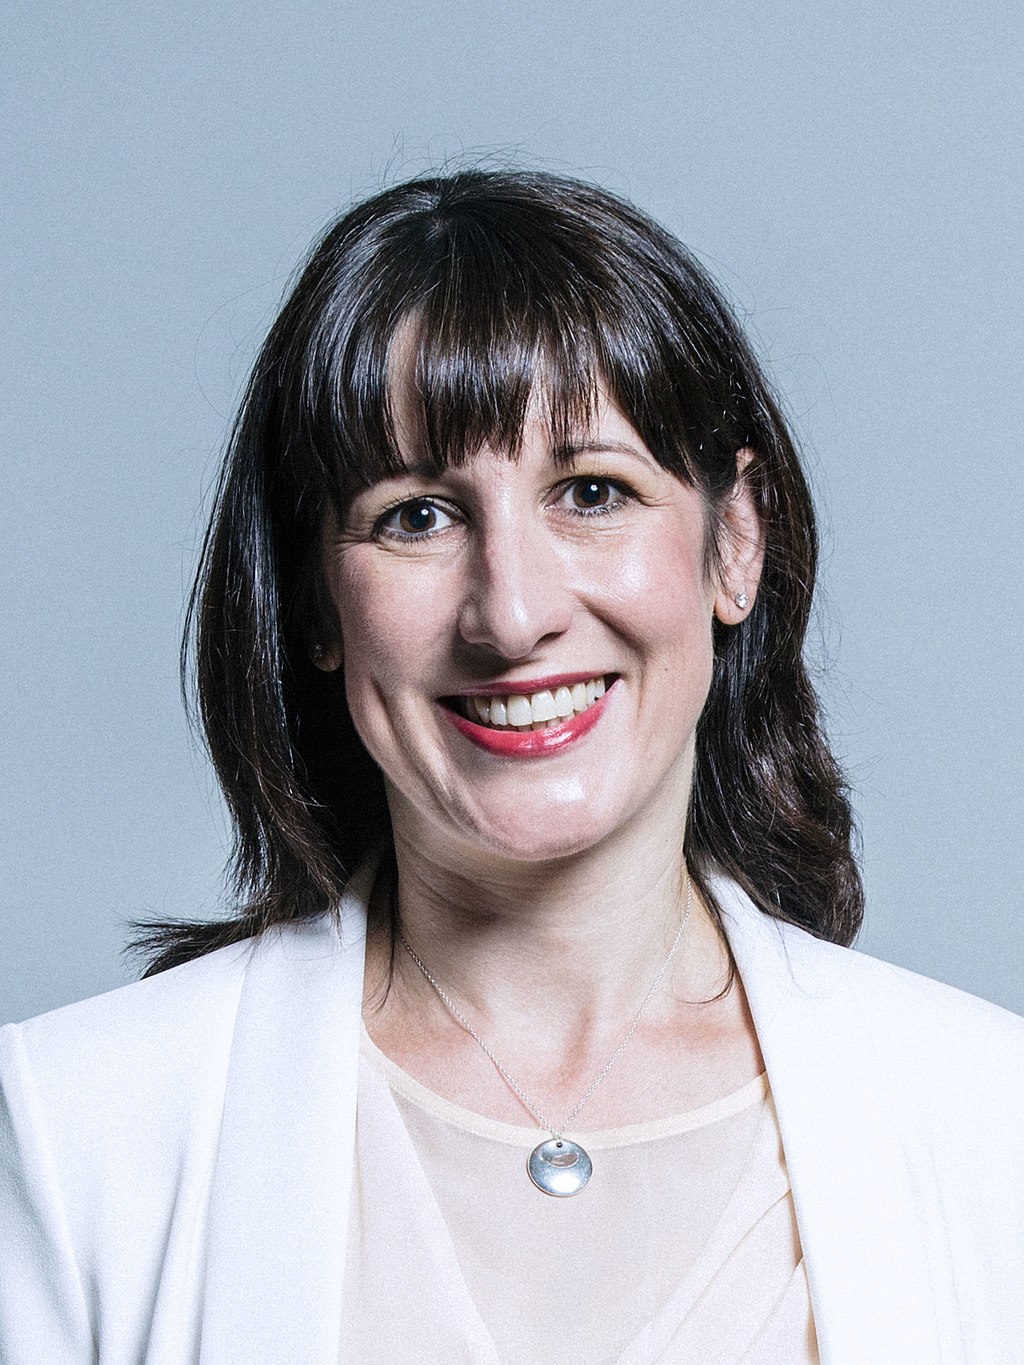 Official portrait of Rachel Reeves looking at the camera and smiling